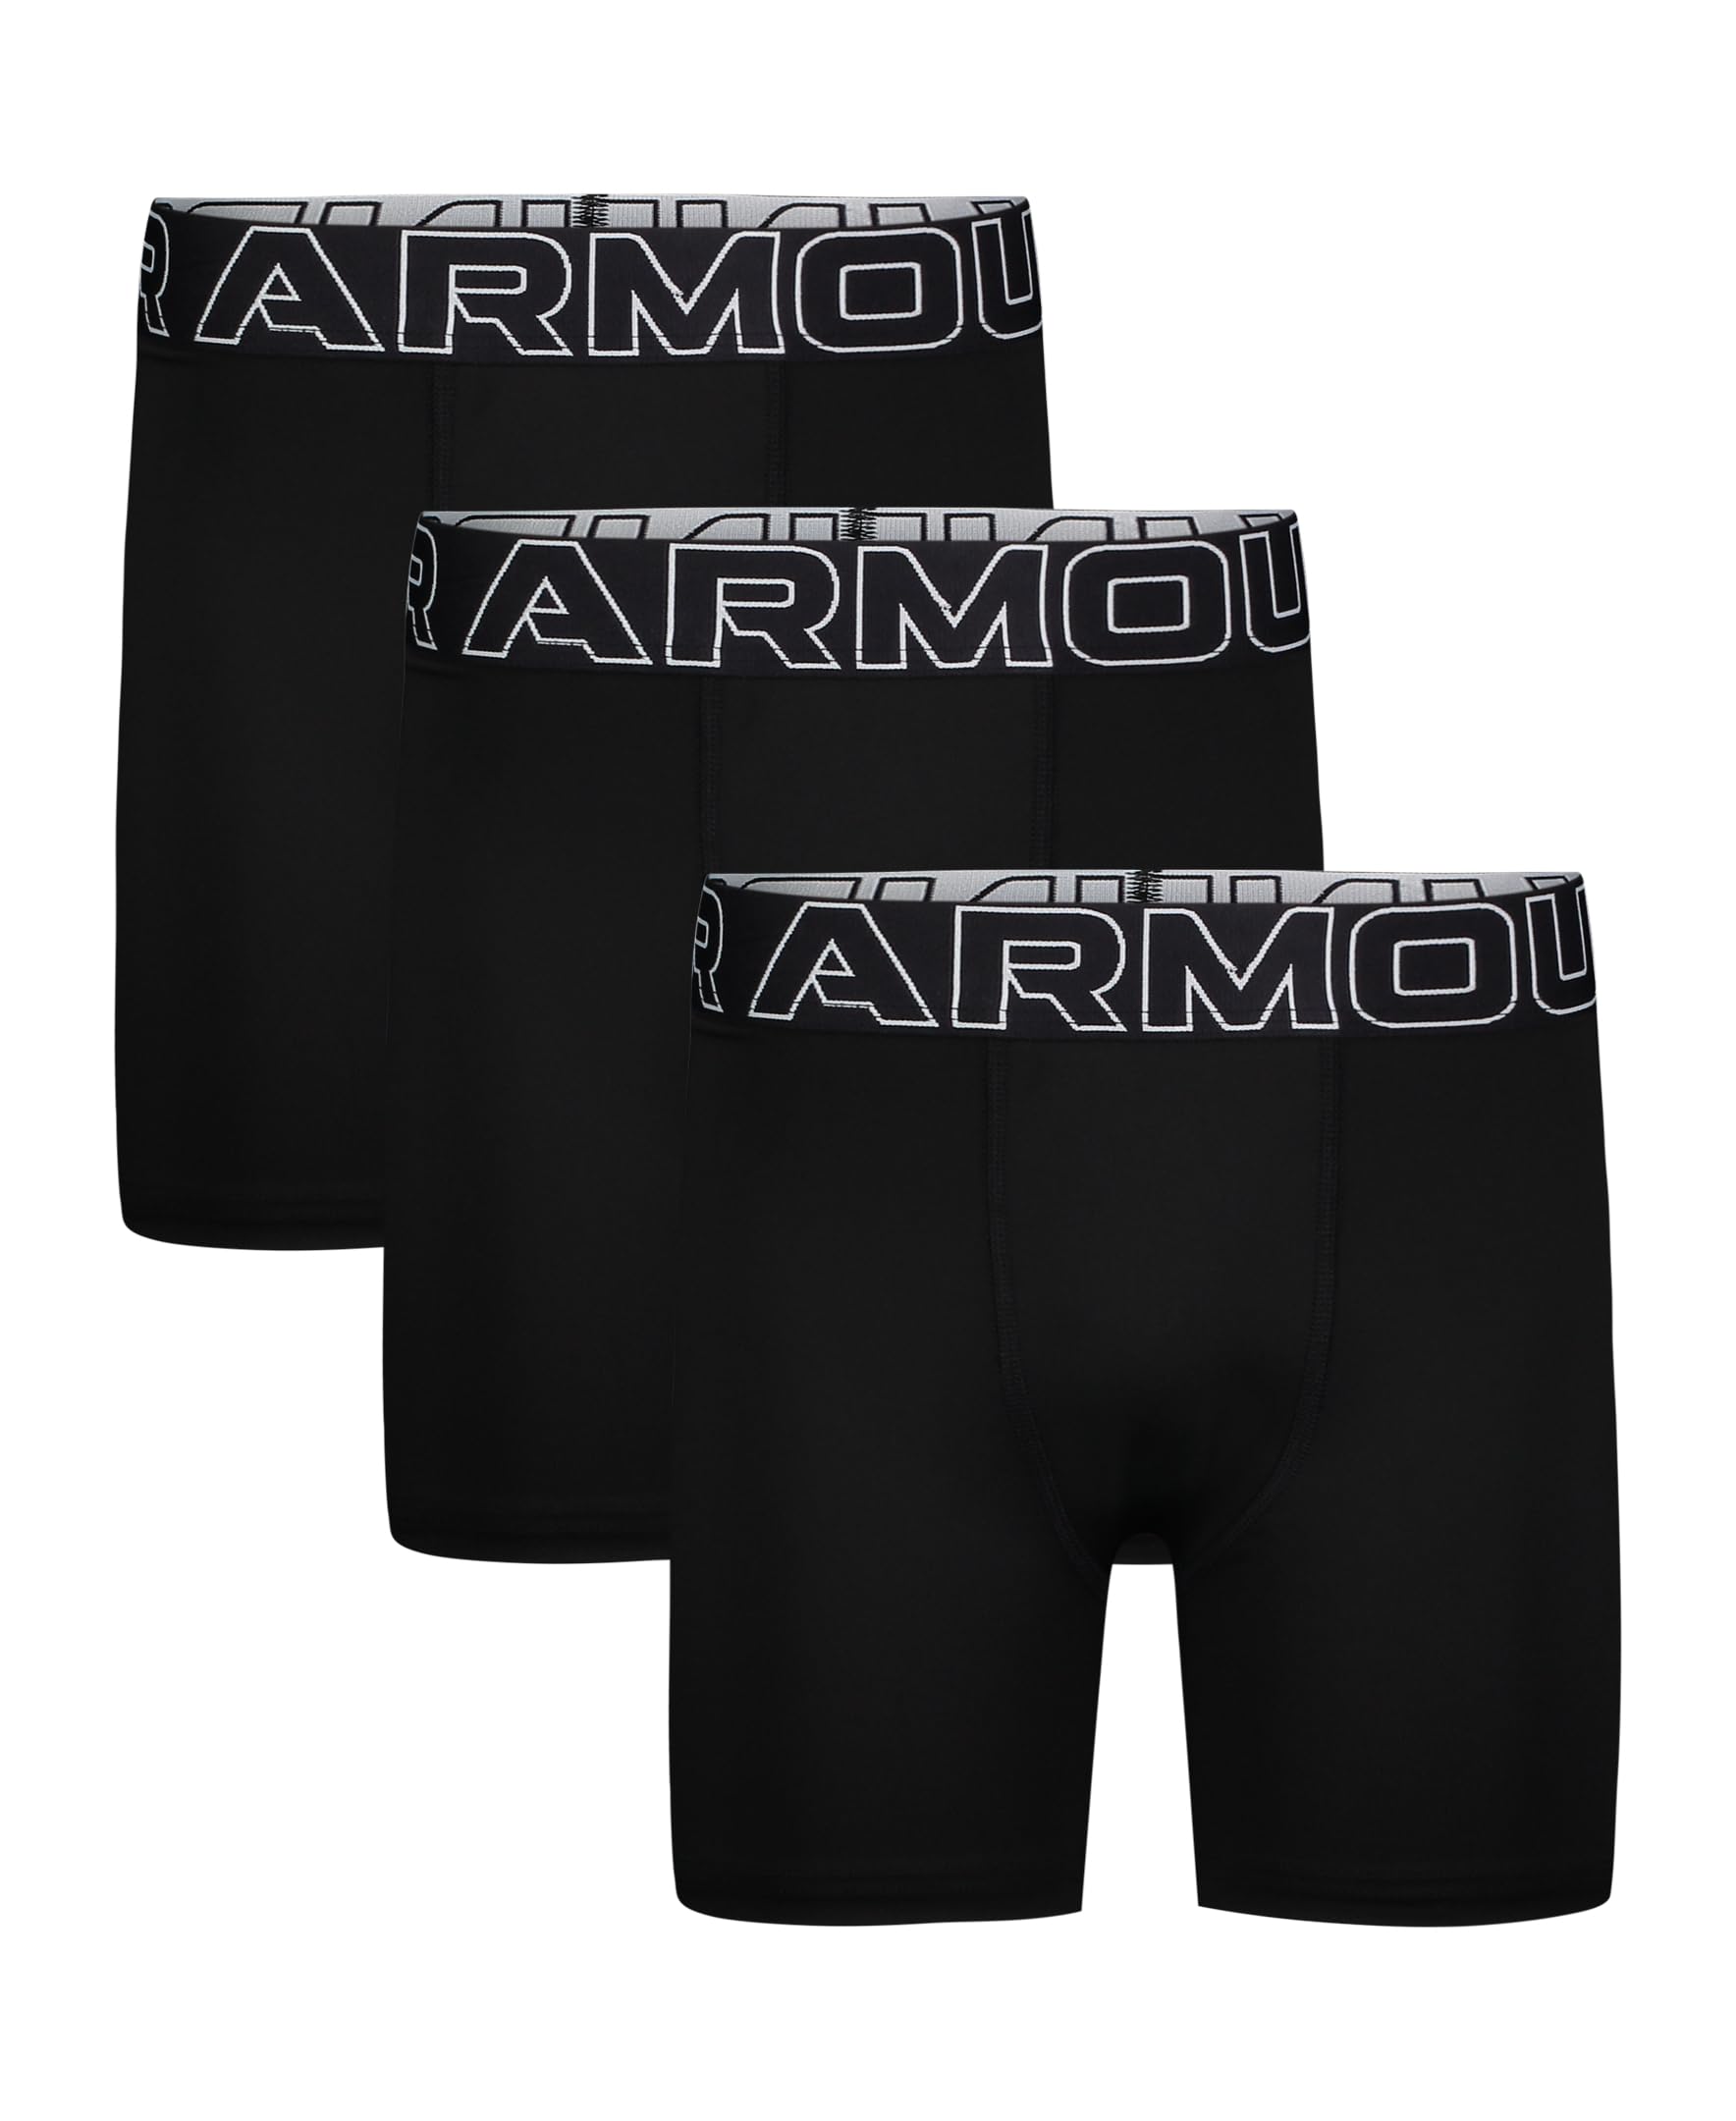 Under Armour Boys' Performance Boxer Briefs, Lightweight & Smooth Stretch Fit